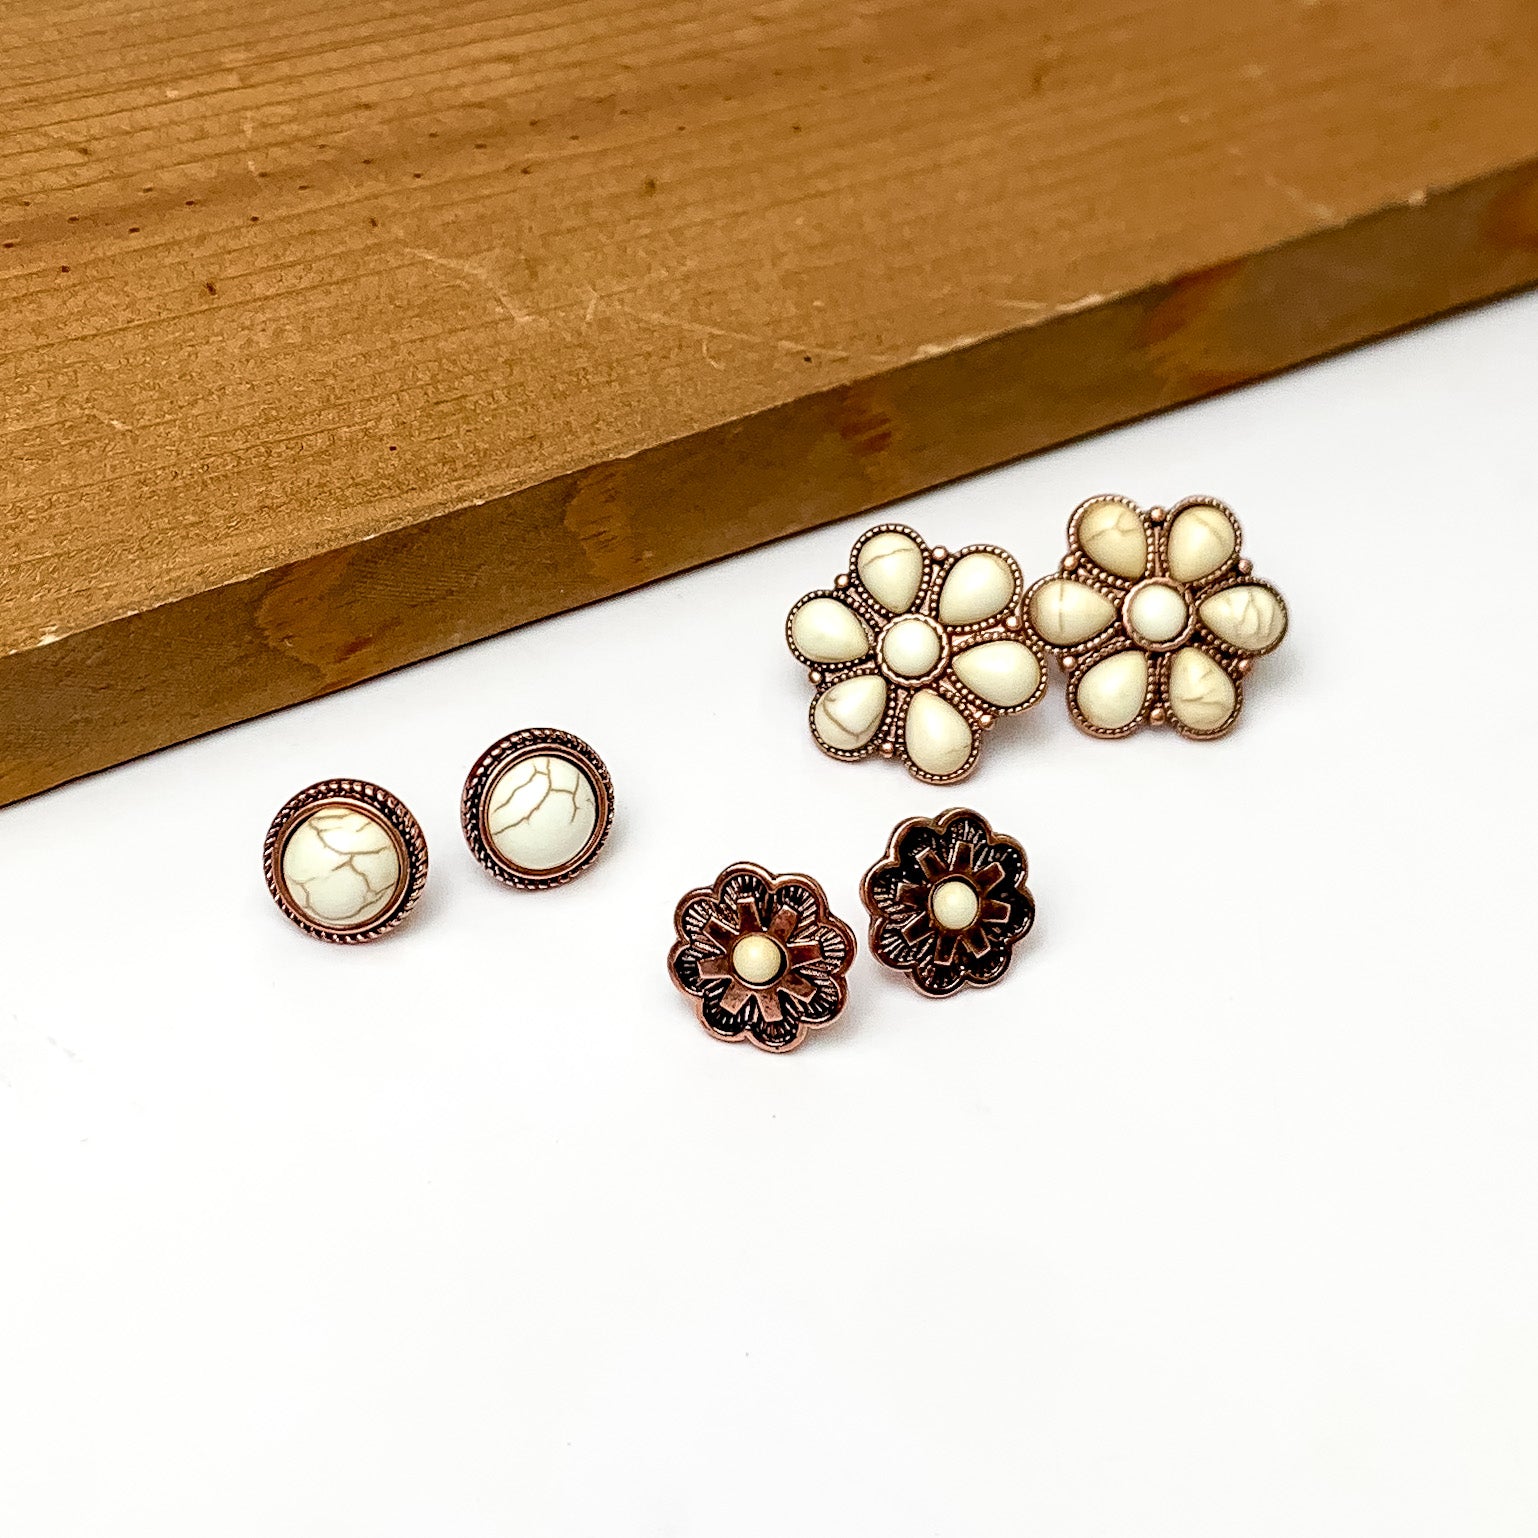 Set Of Three | Multiple Ivory and Copper Tone Stud Earrings. Pictured on a white background with a wood piece above the earrings.